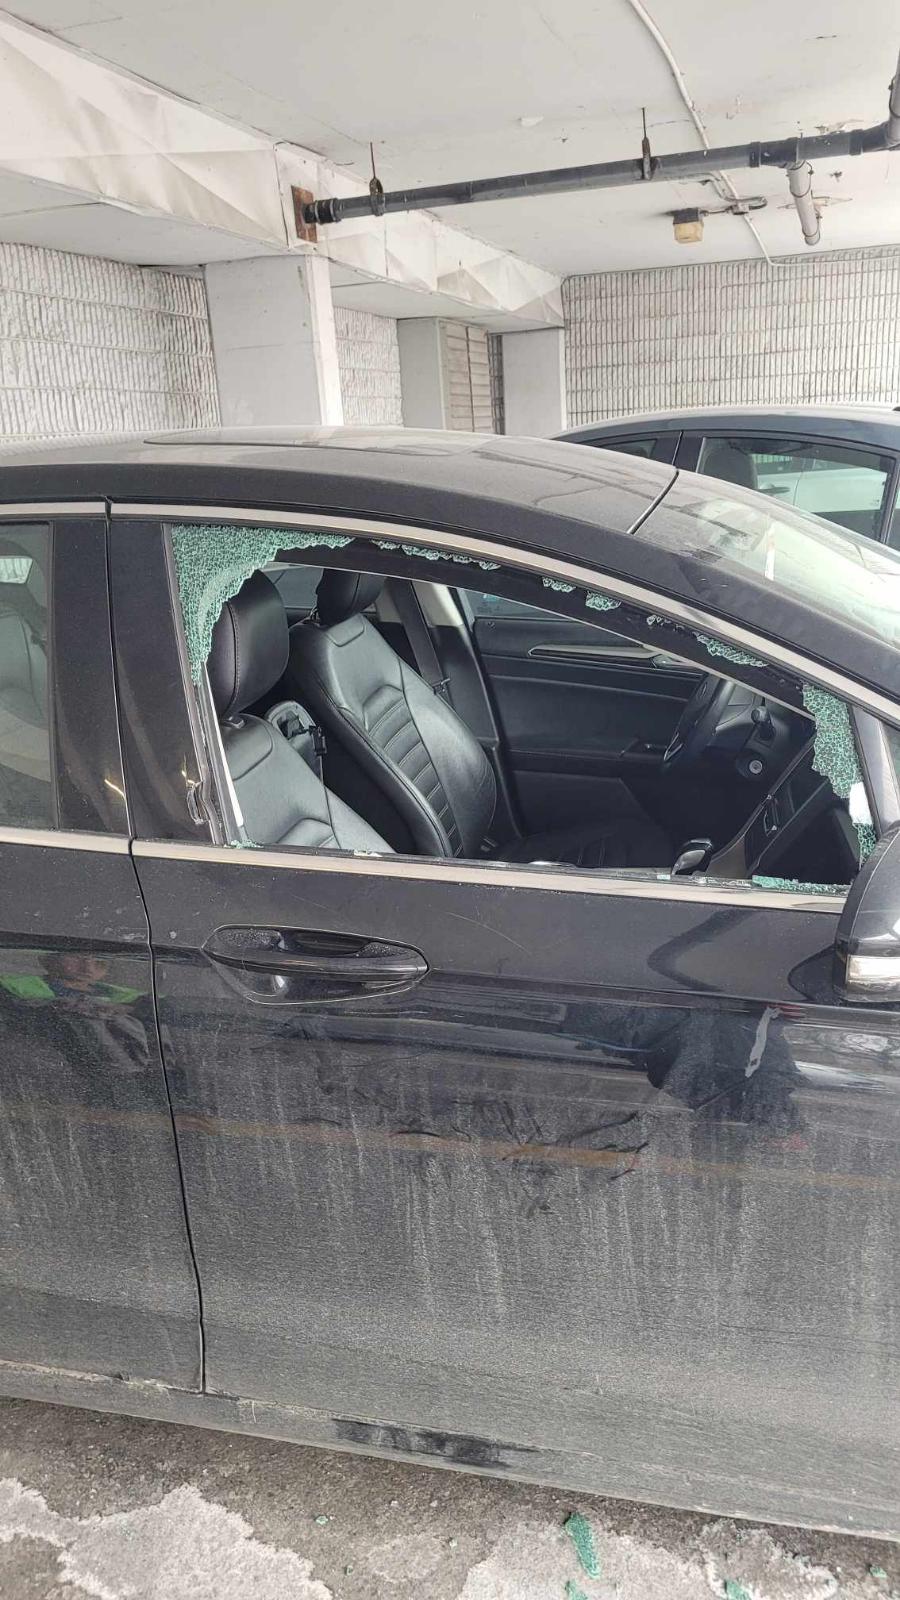 ‘Happening city-wide’: Halifax woman frustrated over constant car break-ins